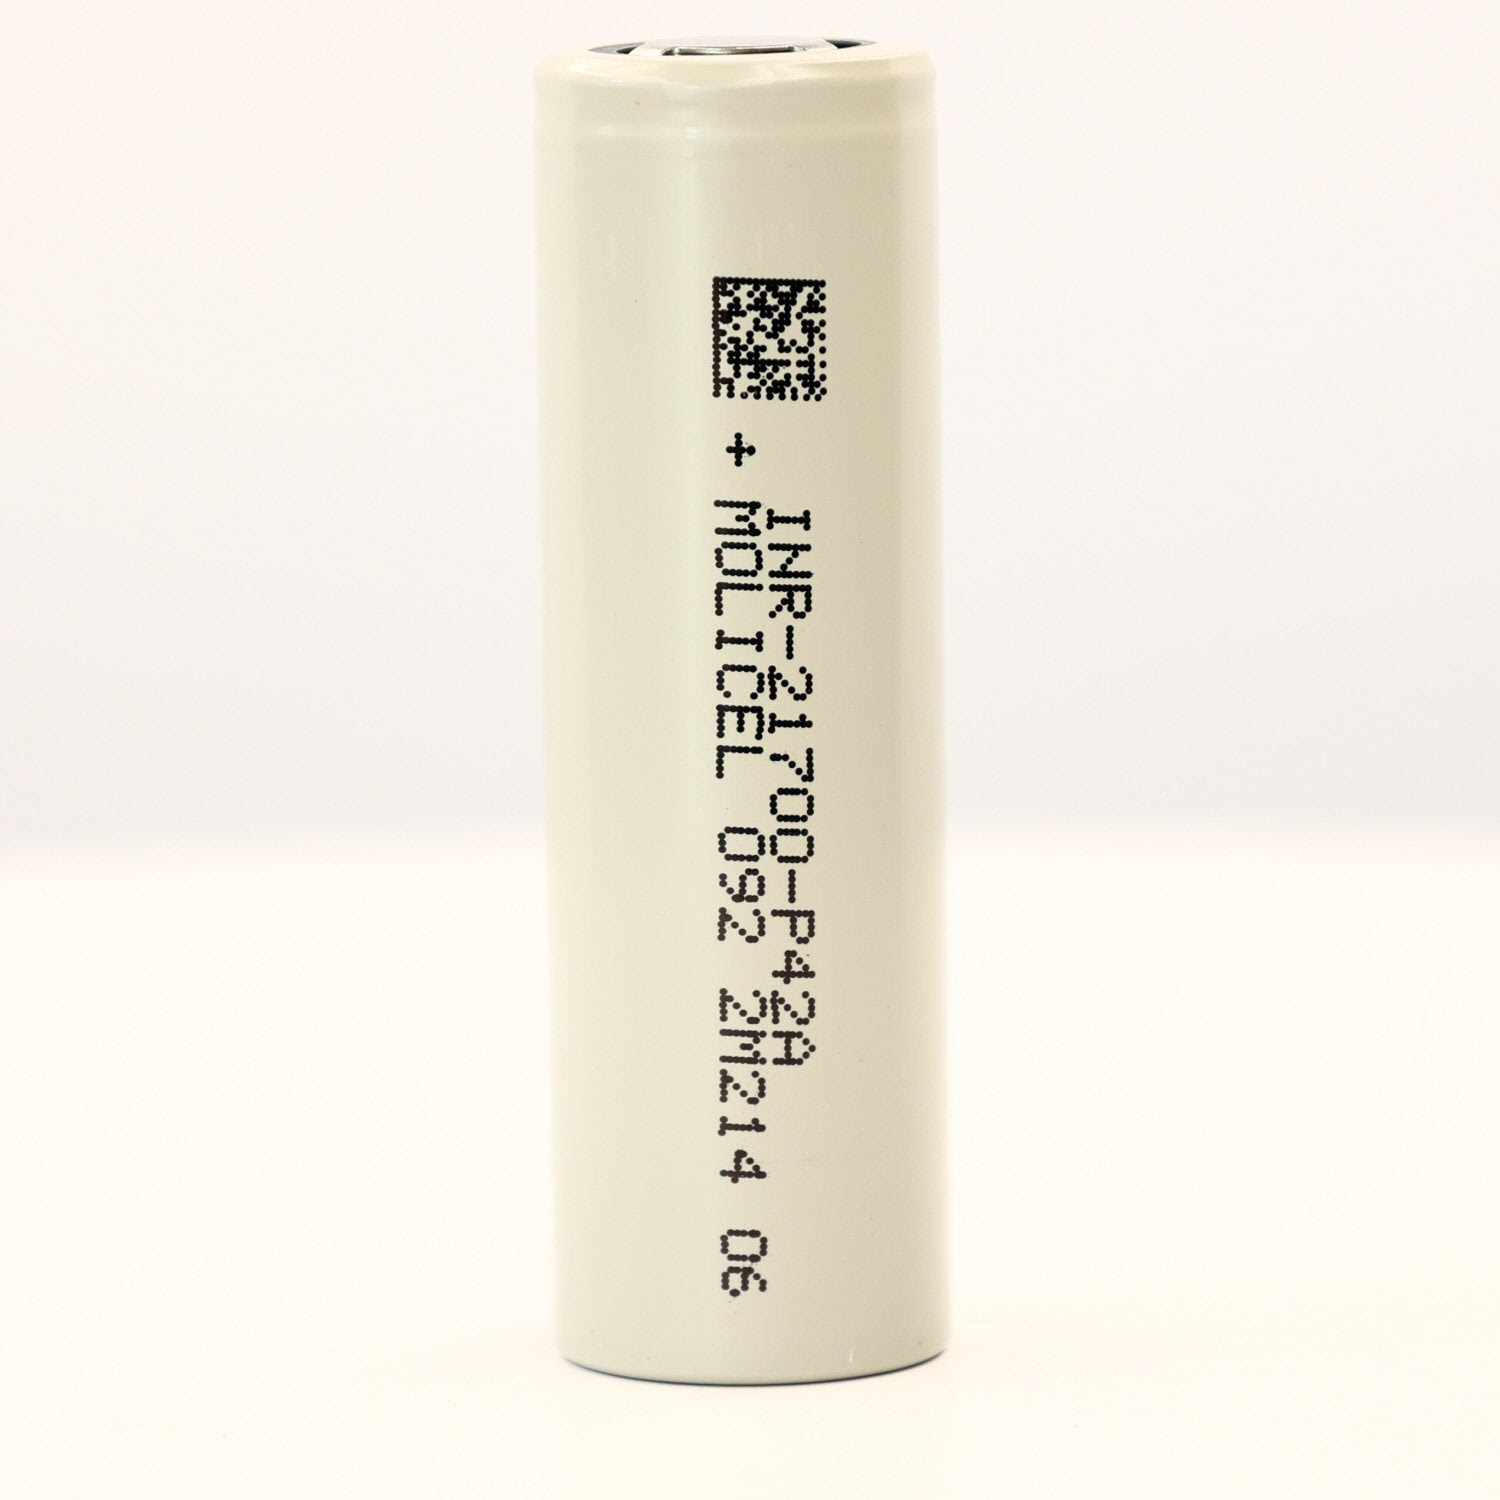 Image of Molicel 21700 P42A 4200mAh 45A Battery